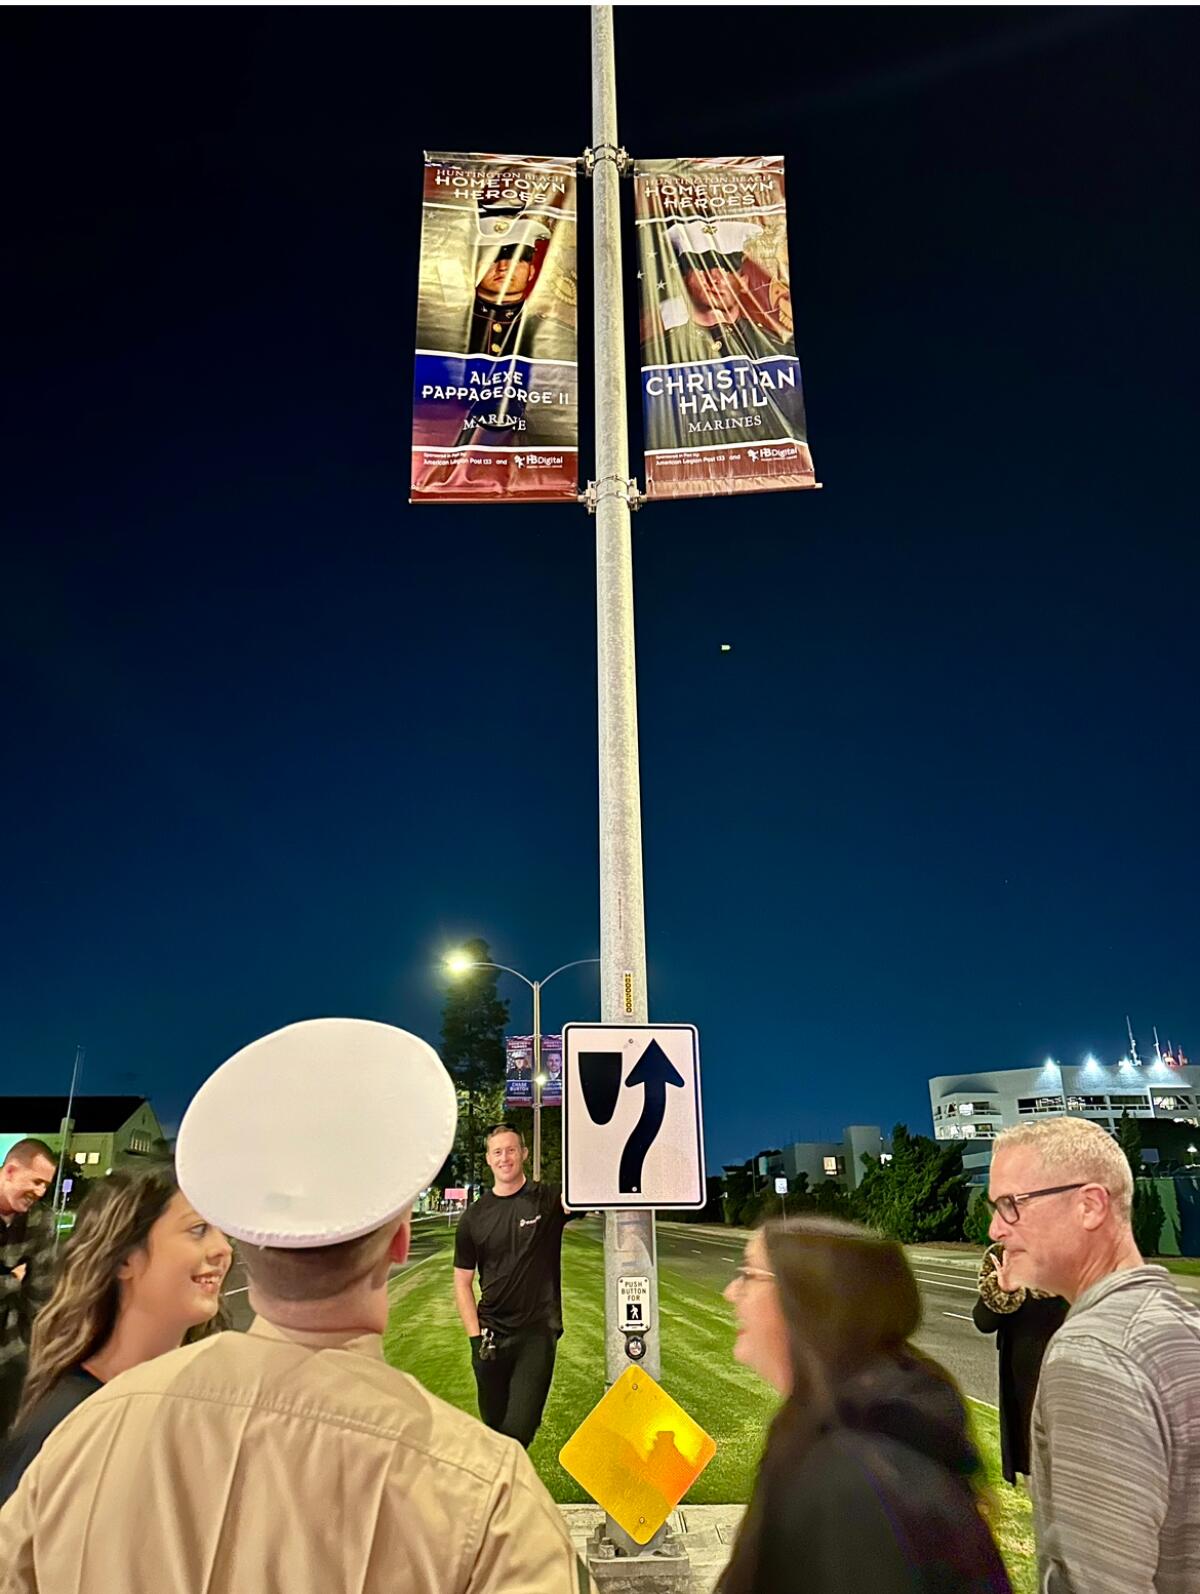 U.S. Marine Alexe Pappageorge Jr., foreground left, looks up at his "hometown hero" banner on Wednesday night.